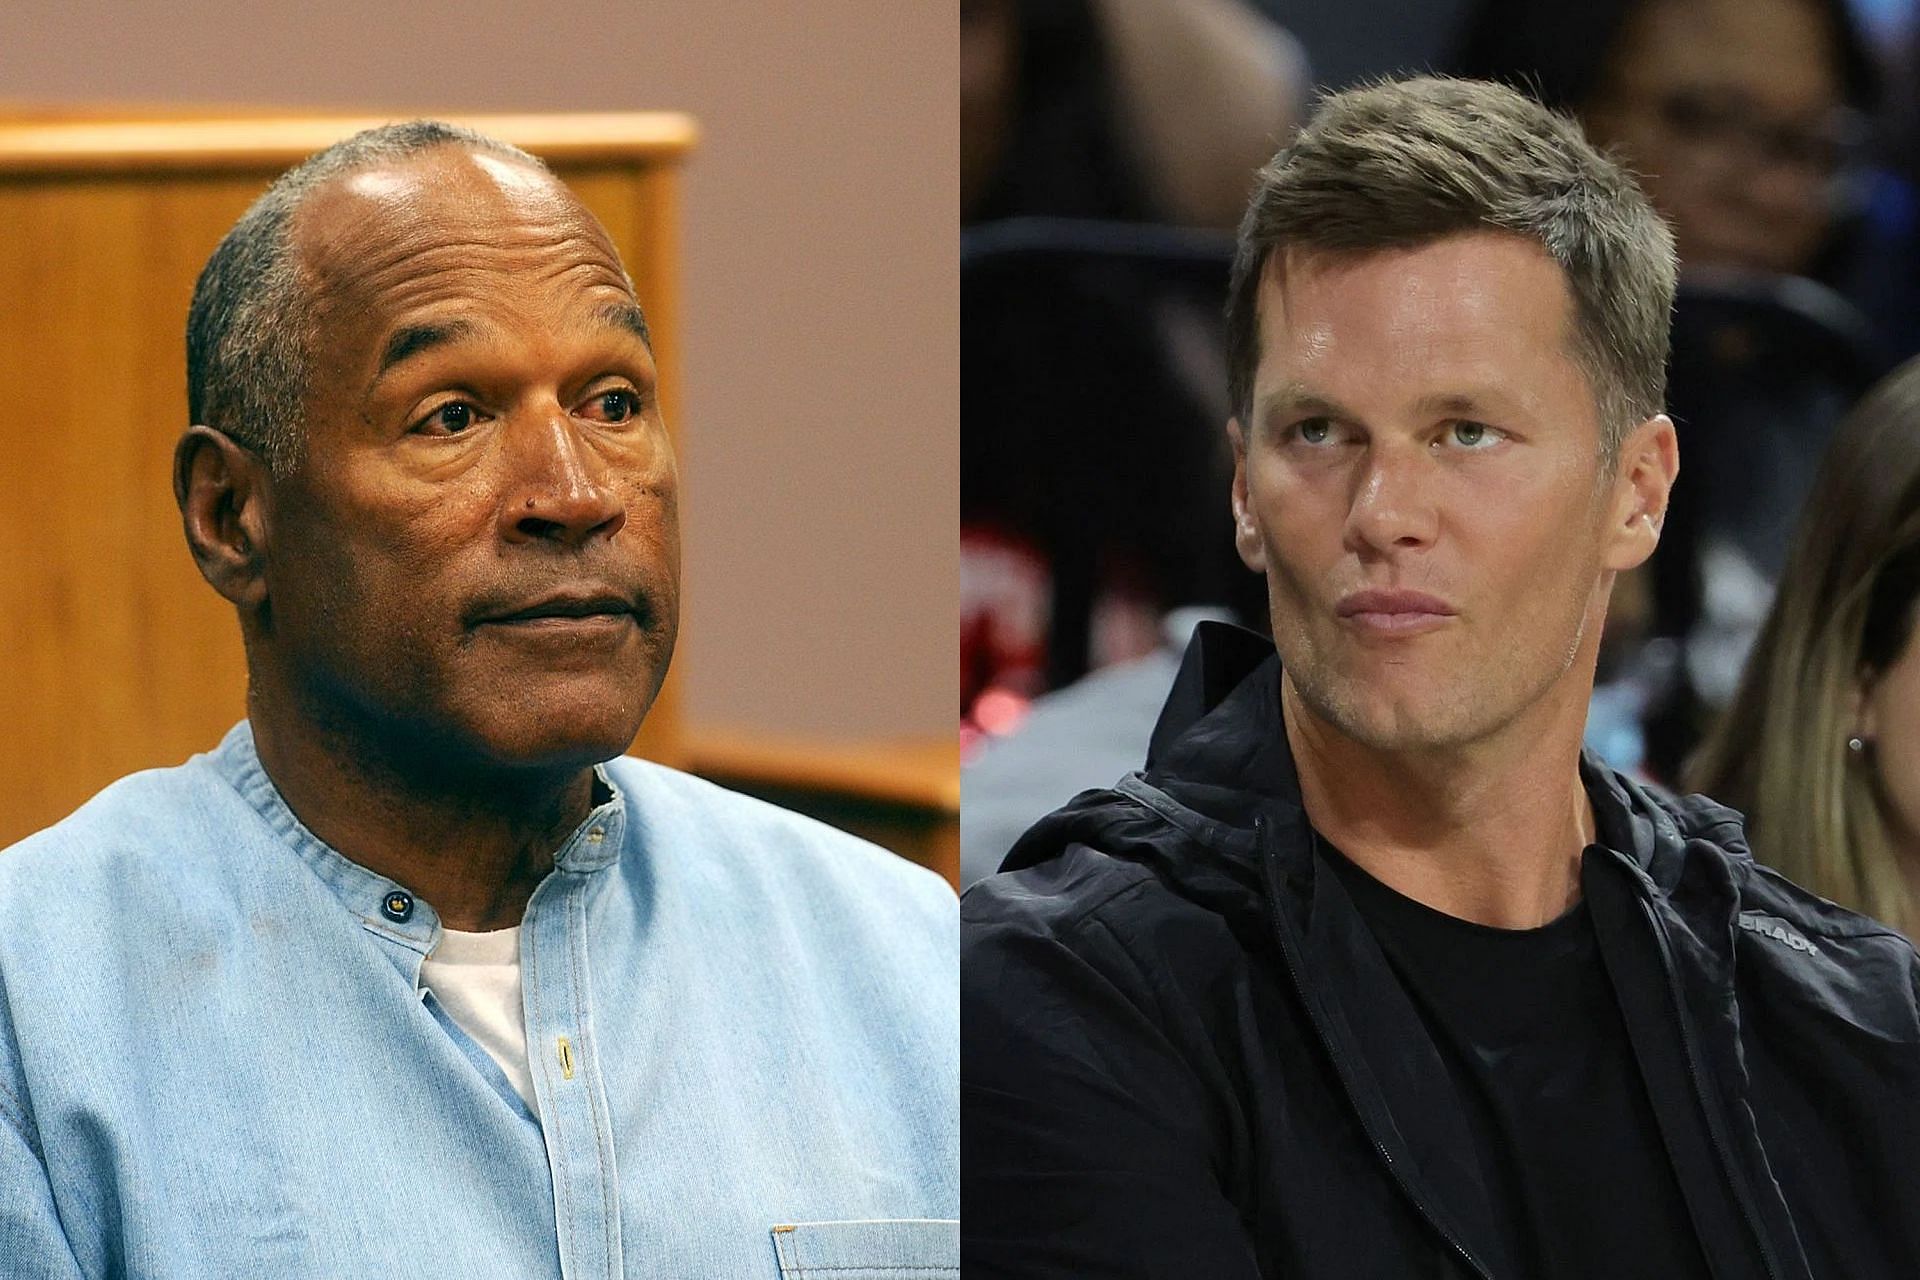 O.J. Simpson claims Tom Brady may be carried &quot;off the field&quot; if 3x MVP unretires for Jets stint